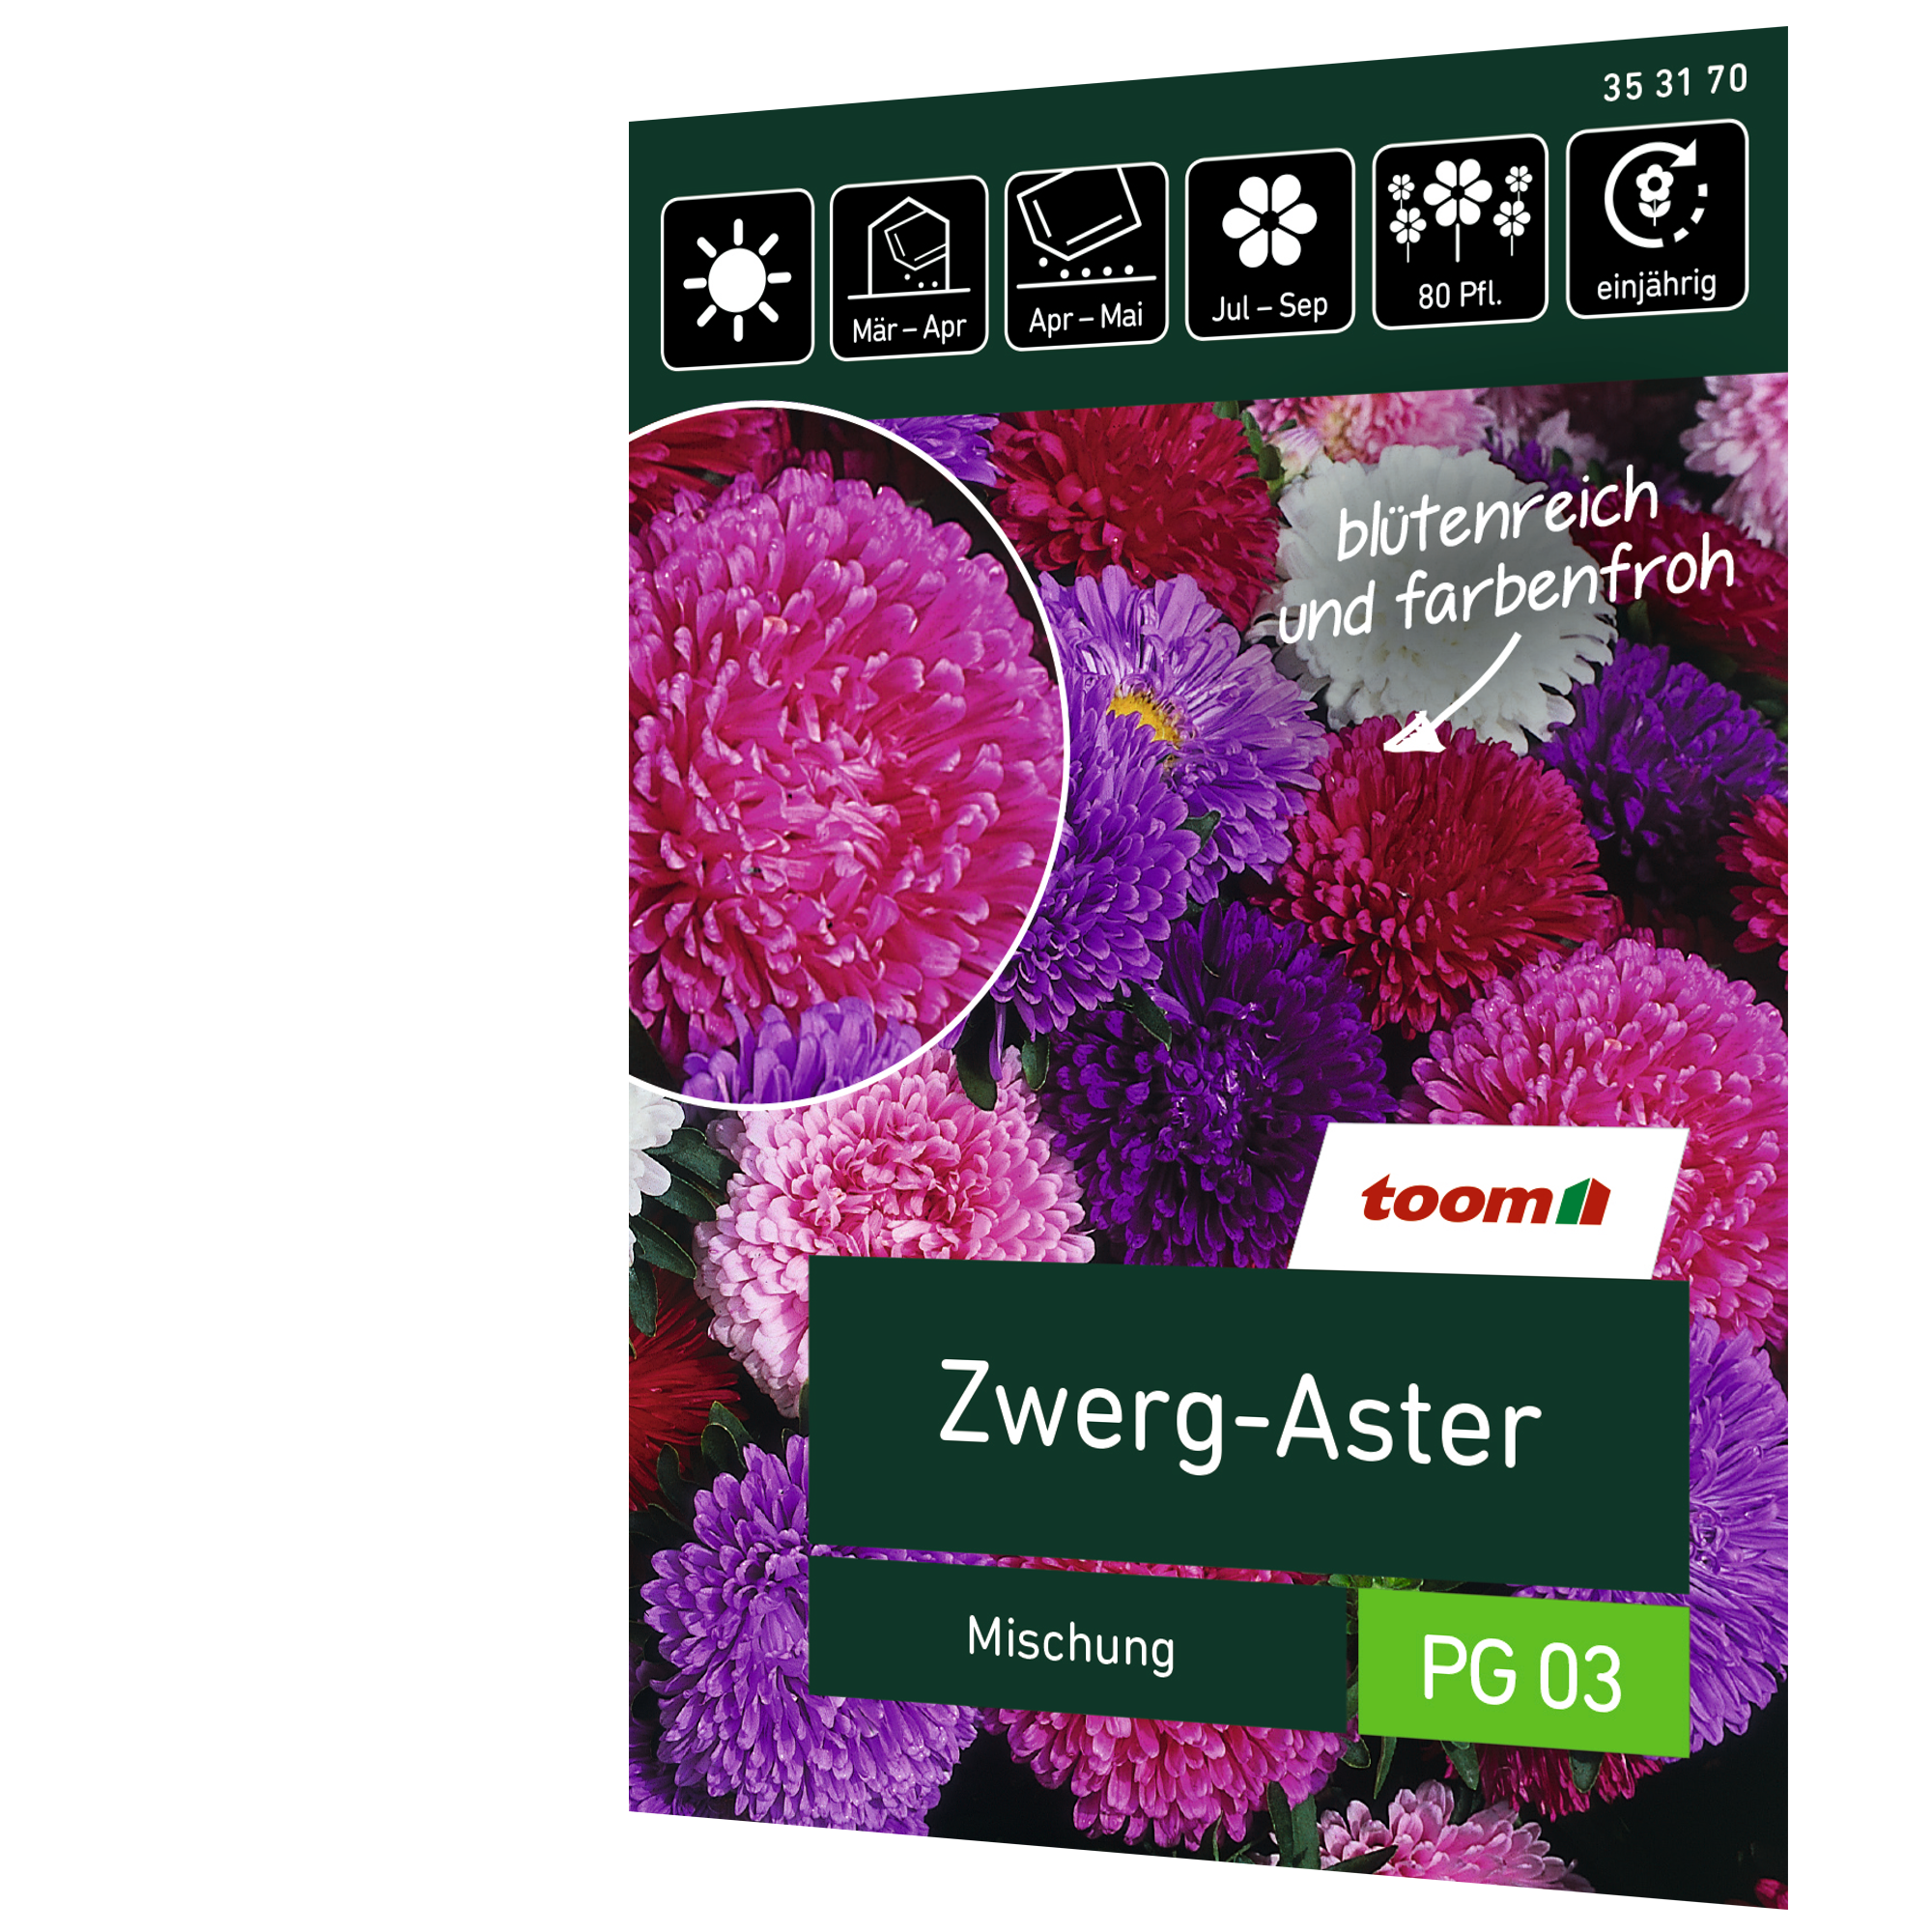 Zwerg-Aster 'Mischung' + product picture